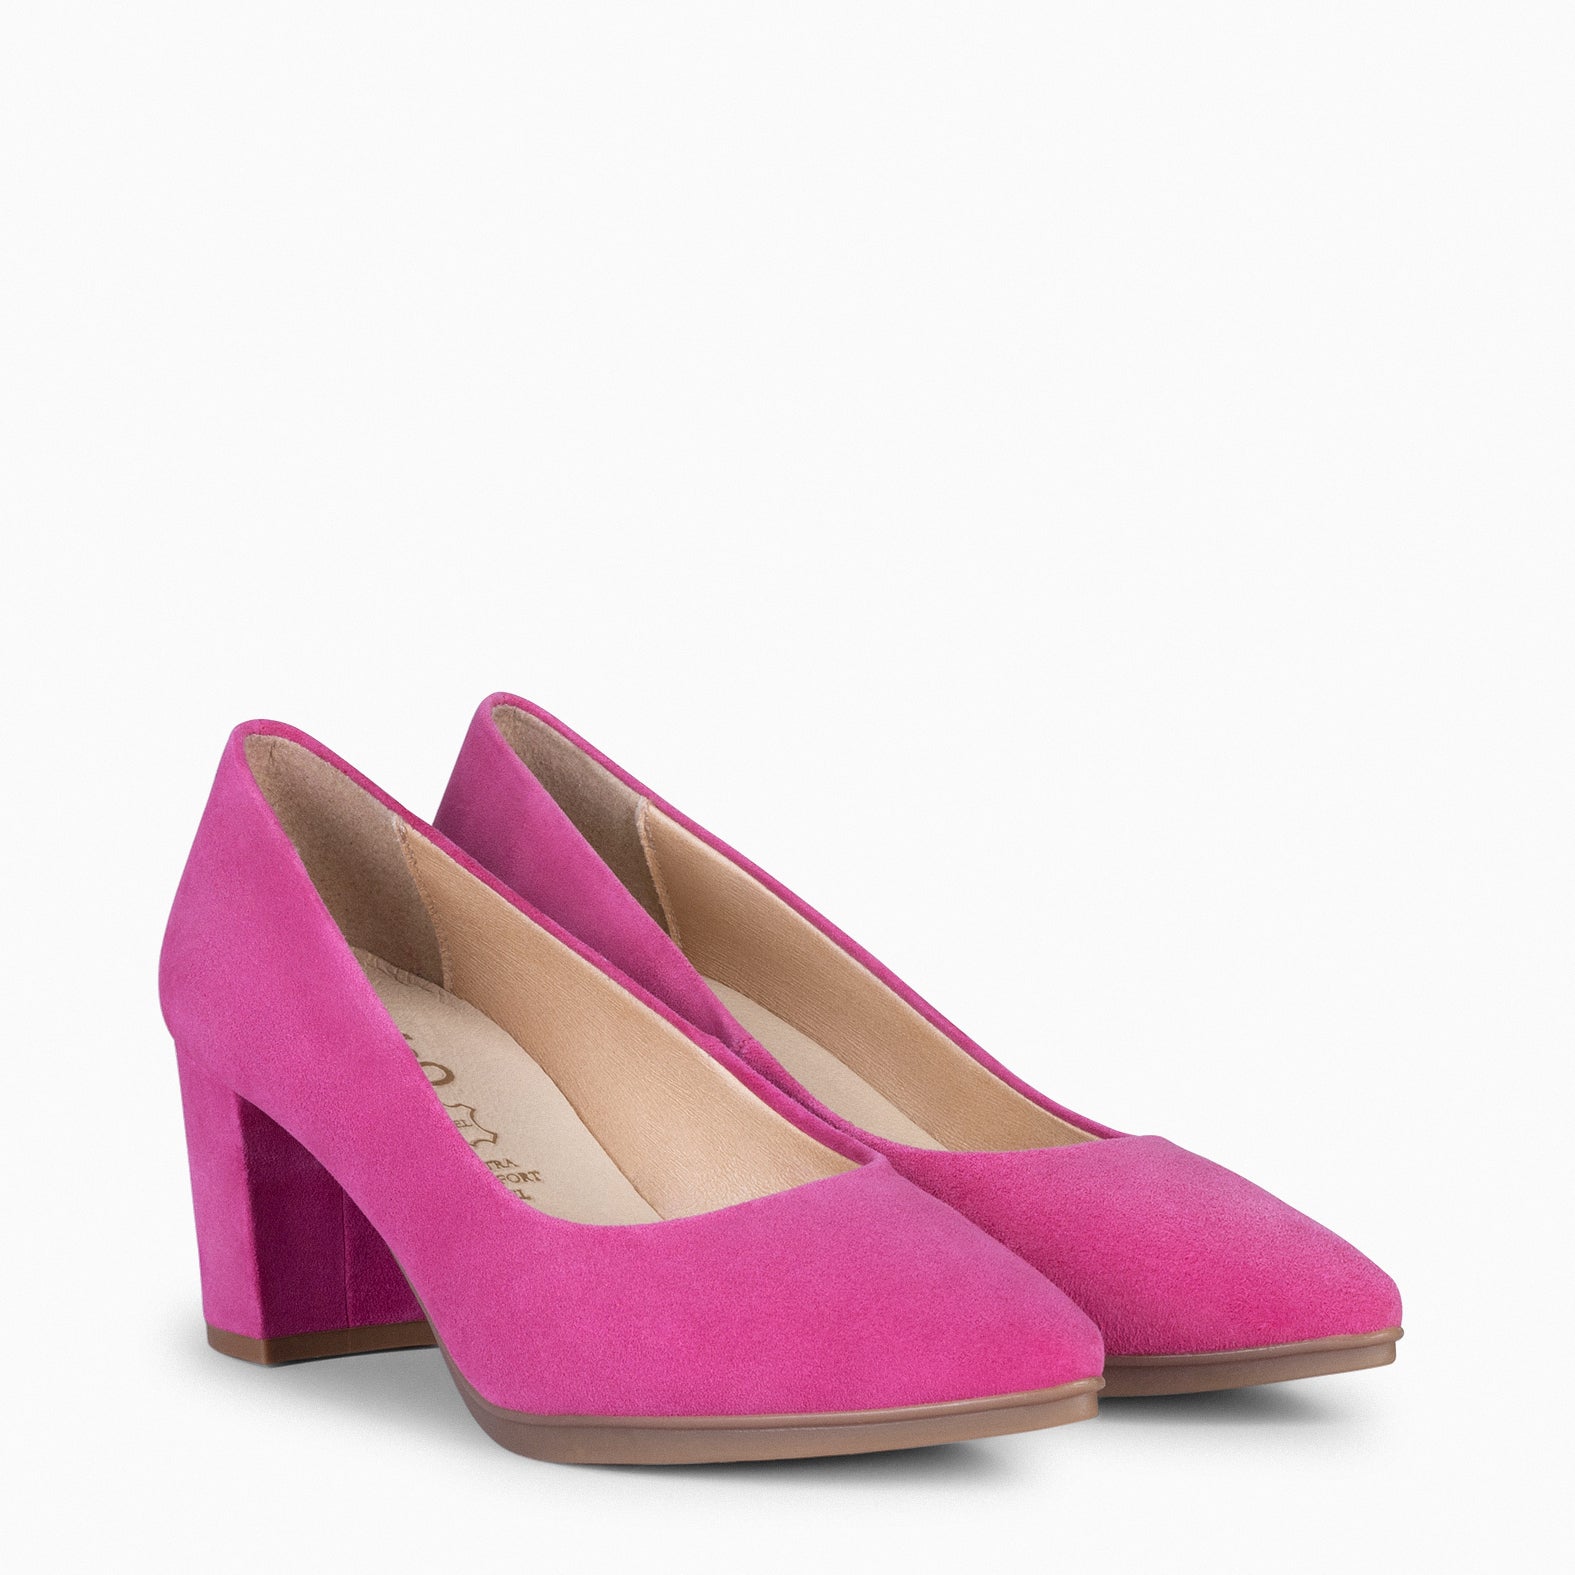 URBAN S – FUCHSIA Suede Mid-Heeled Shoes 